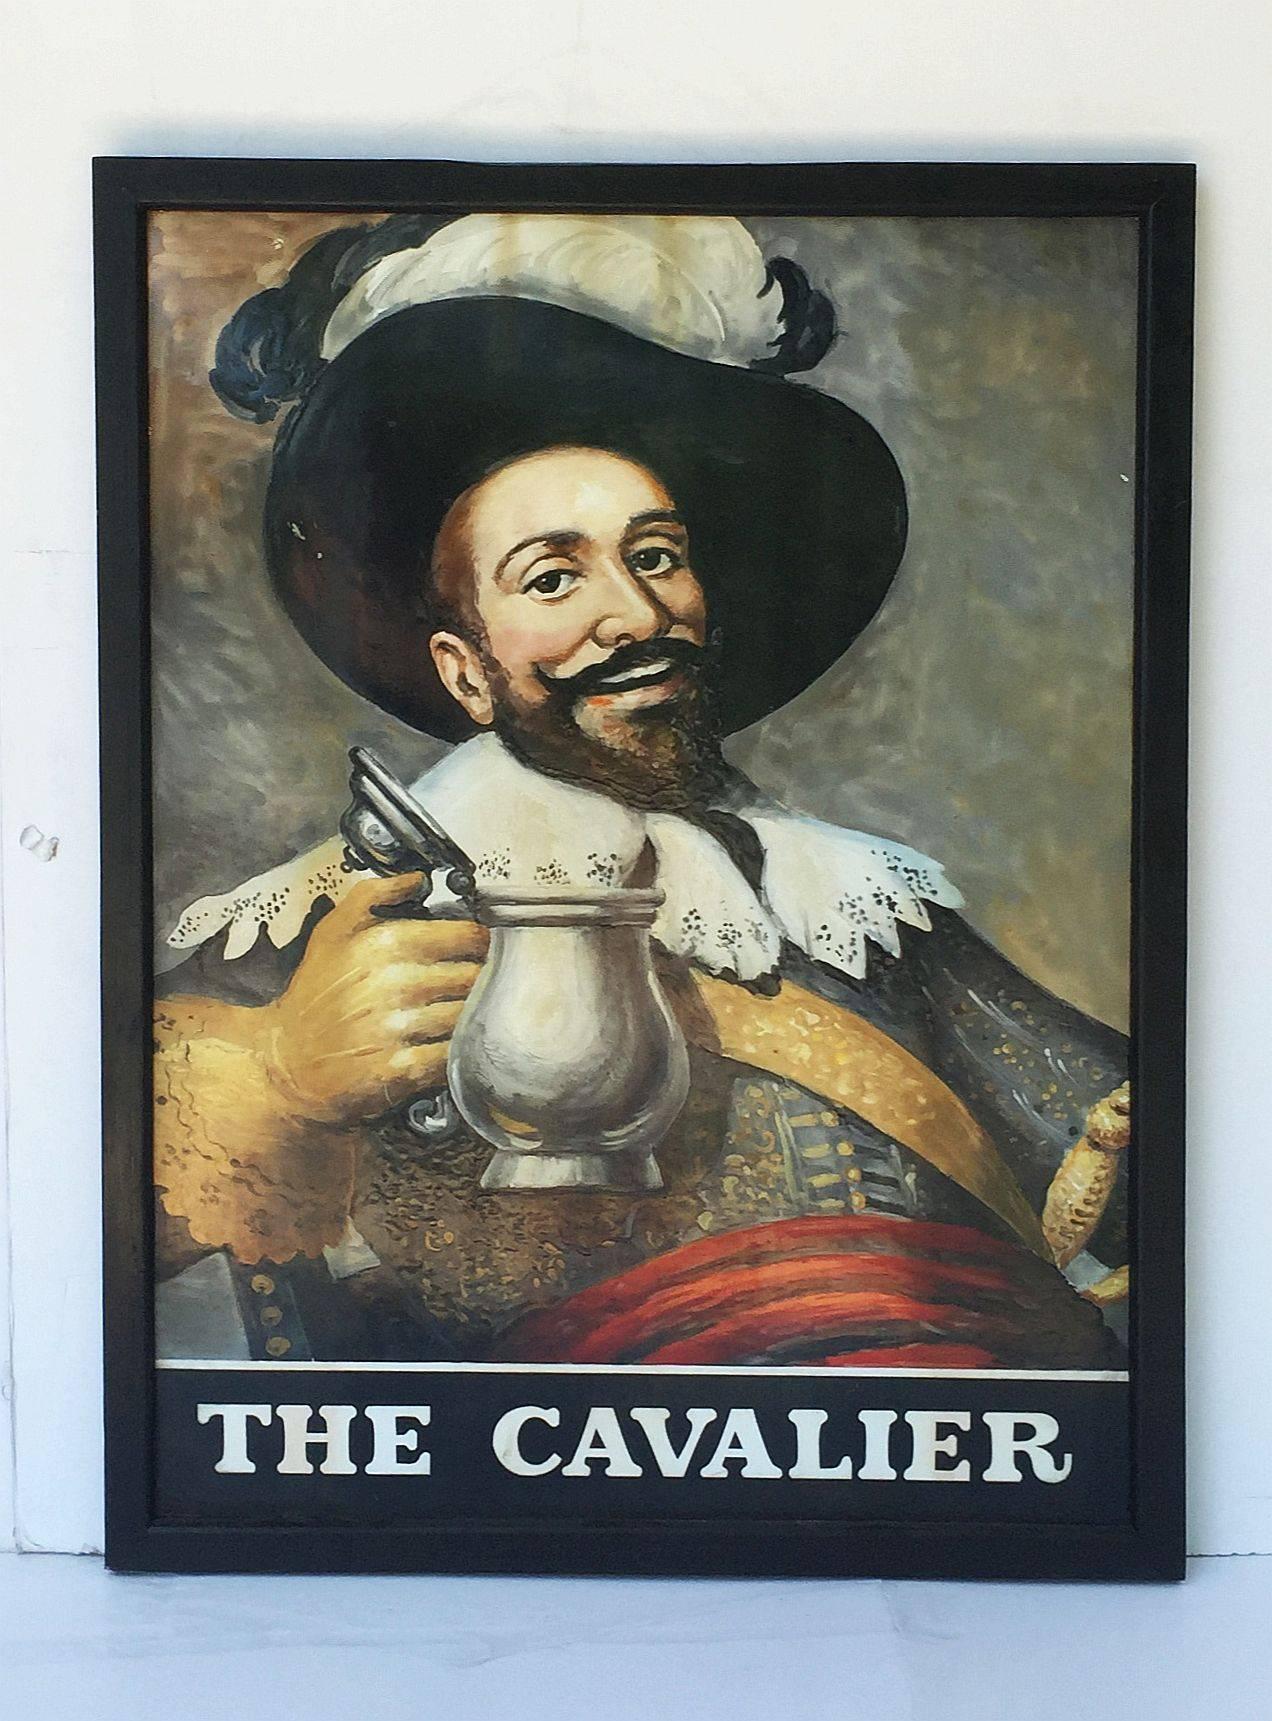 An authentic English pub sign (one-sided) featuring a painting of a smiling man in full 17th century dress holding up an open pewter ale tankard, entitled: The Cavalier

Cavalier was first used as a term for the wealthier Royalist supporters of King